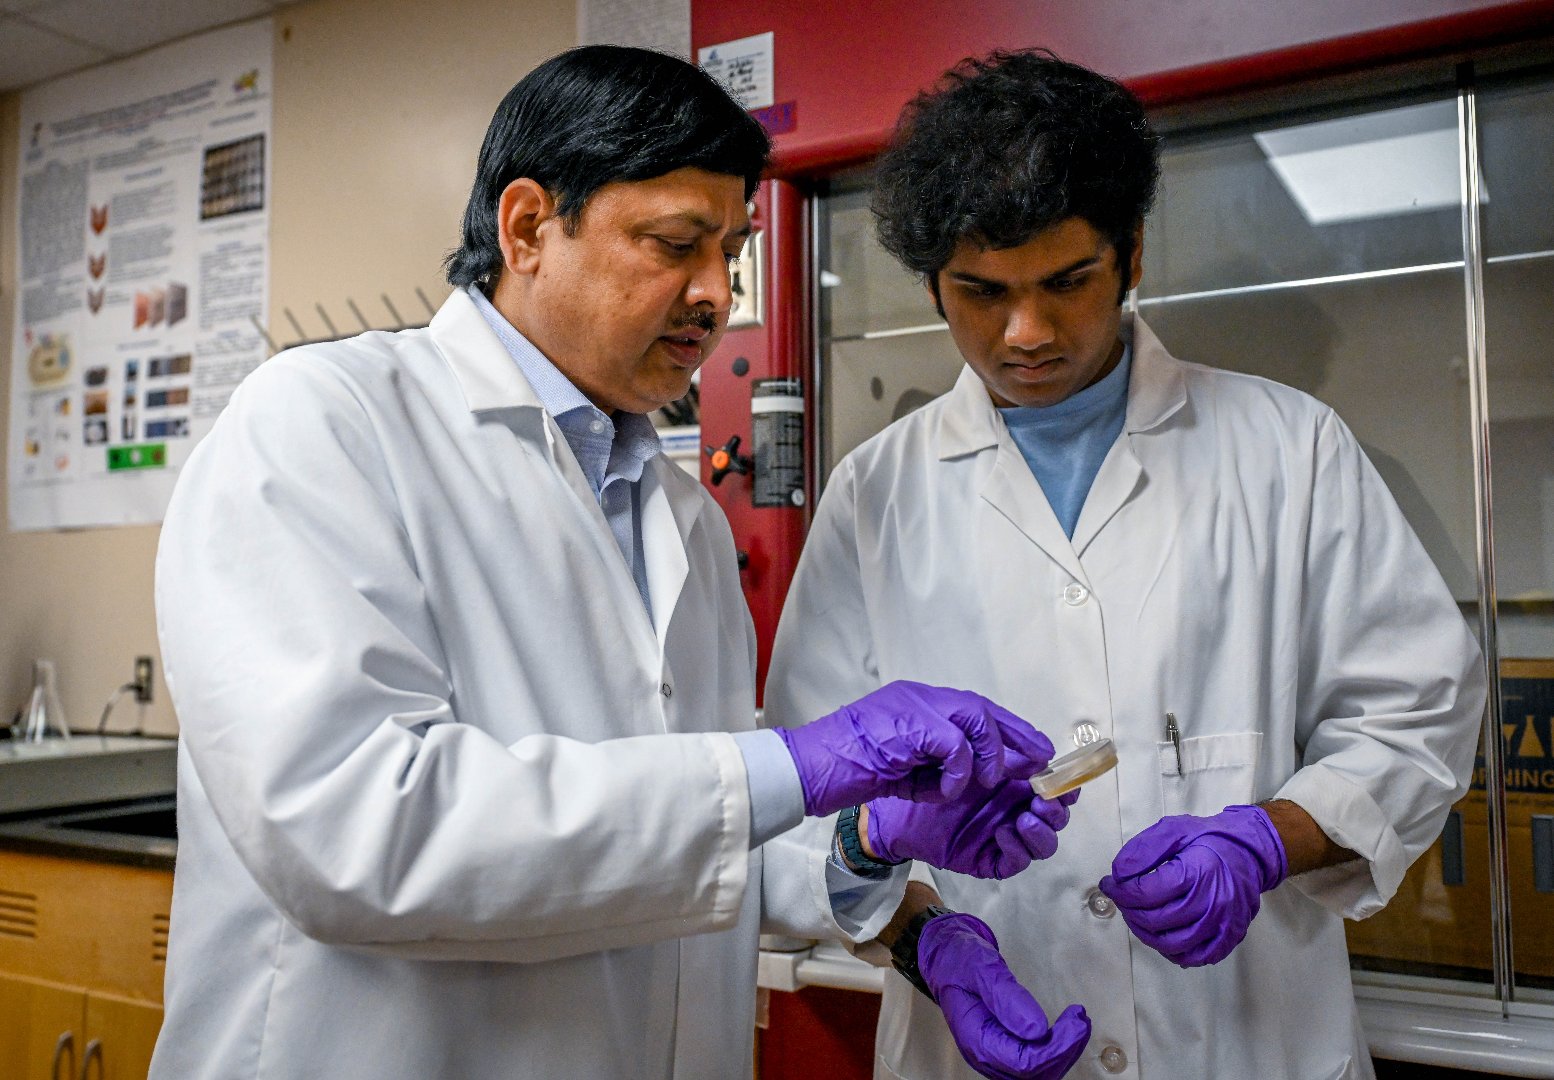 Dr. Hari Singh, FVSU professor and chair of the Department of Agricultural Sciences, mentors Degala in the Nanotechnology Laboratory.